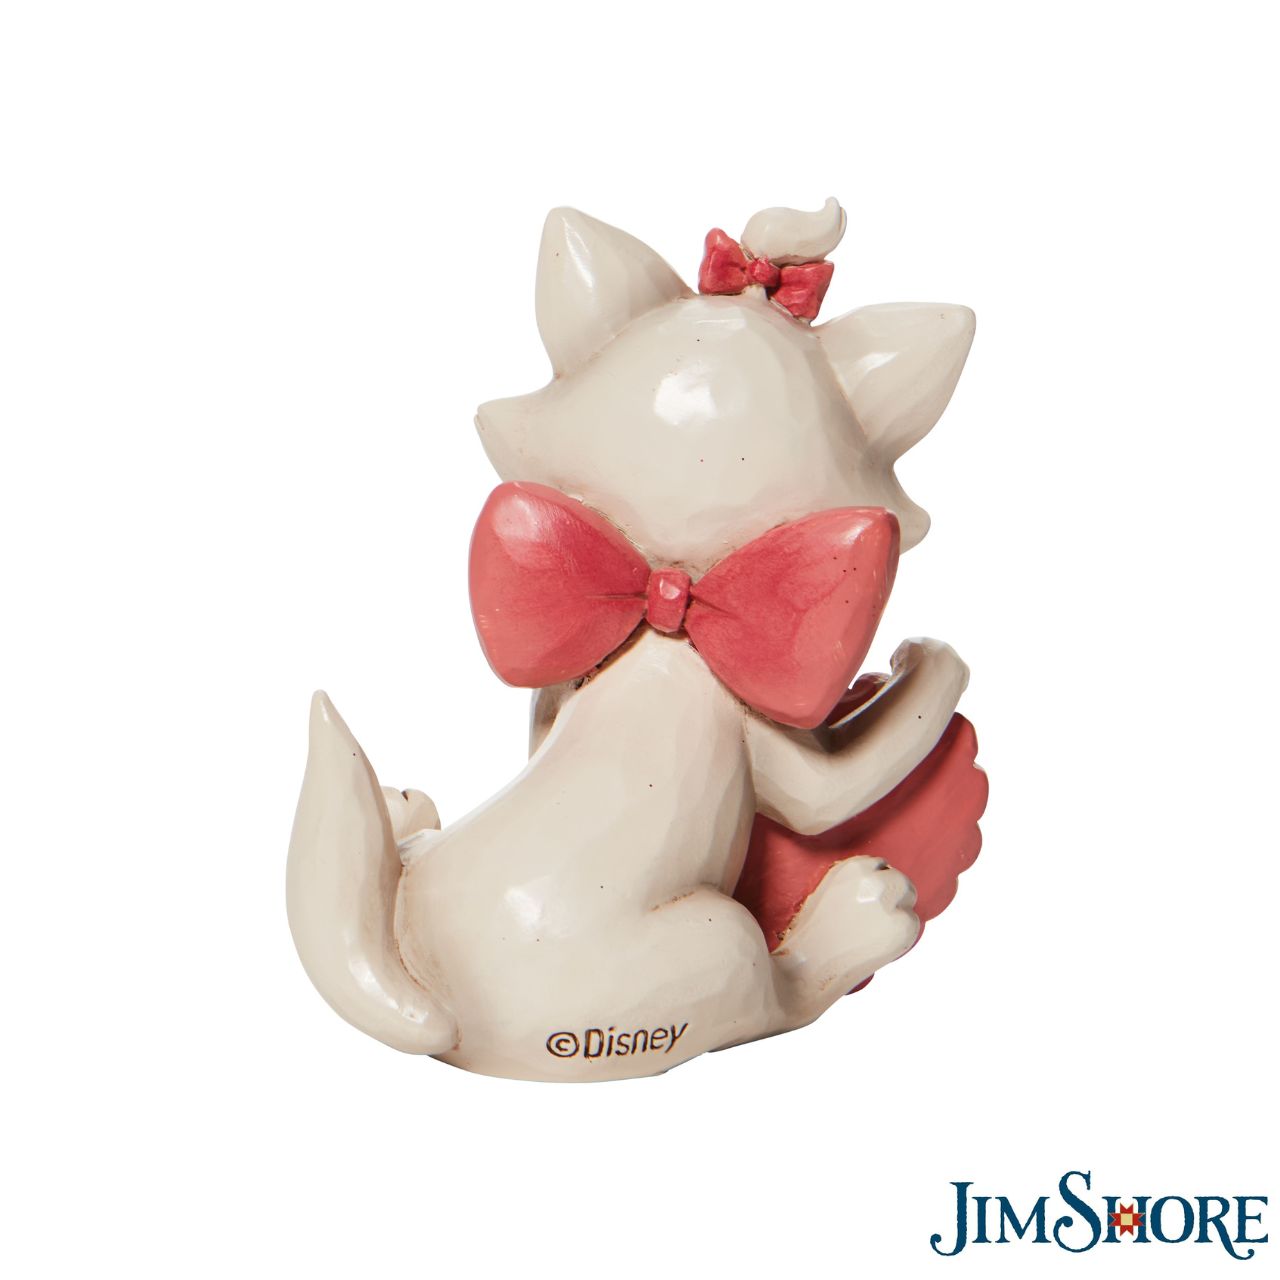 Jim Shore The Aristocats Marie Heart Mini Figurine  The 1970 Walt Disney classic, The Aristocats, followed three kittens and their mother across the Parisian countryside after being cat-napped from their home. Marie, the only daughter of the bunch, holds a pink heart in this sweet Jim Shore figurine. Packaged in a branded gift box.